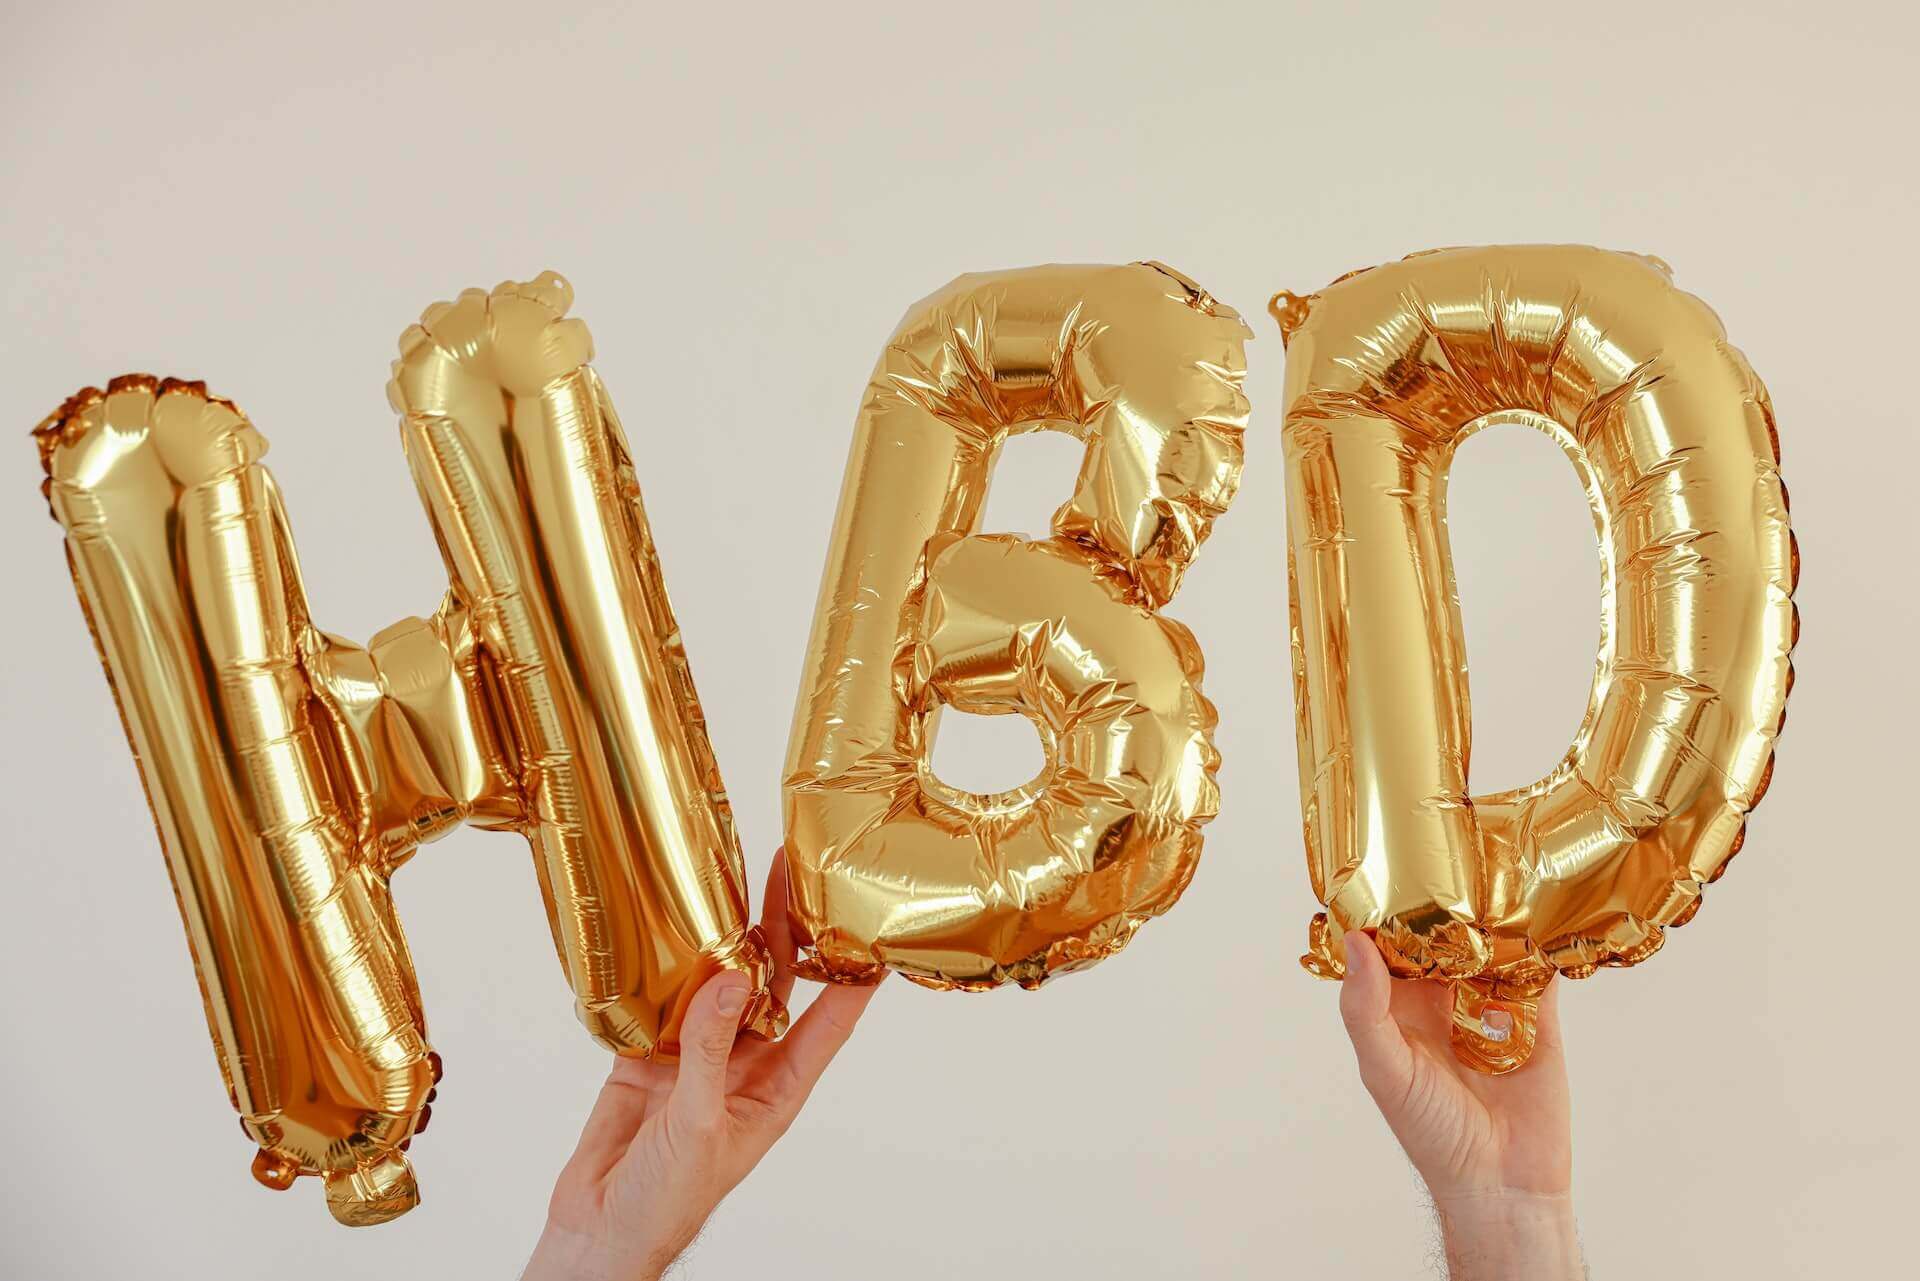 Two hands hold up gold balloons spelling “HBD”.